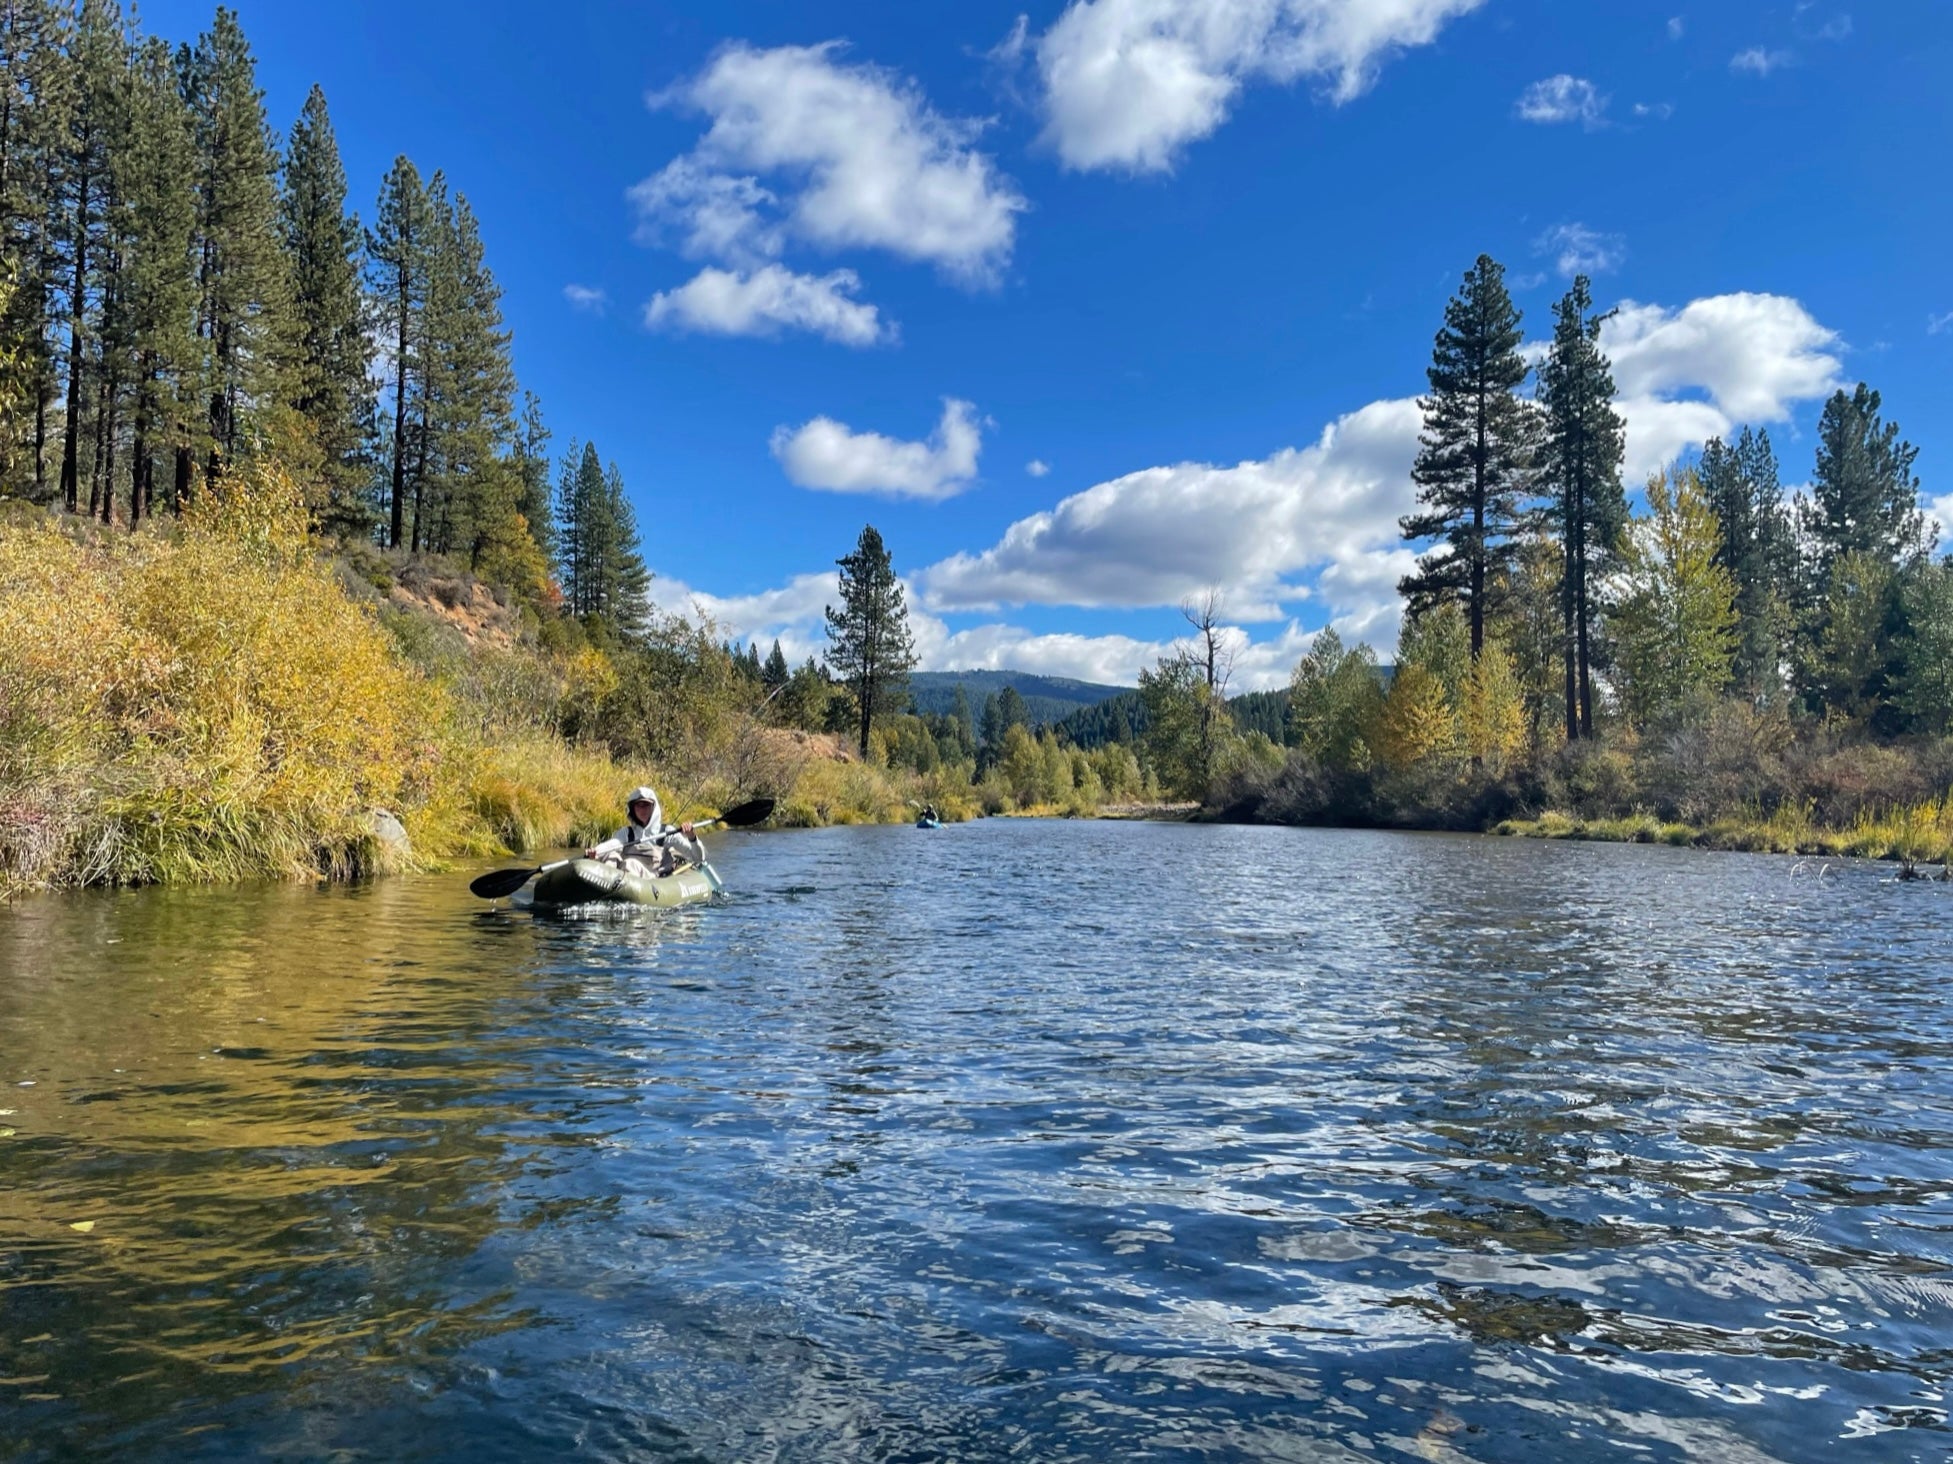 Packraft Fly Fishing: The Ultimate Backcountry Fishing Advantage!